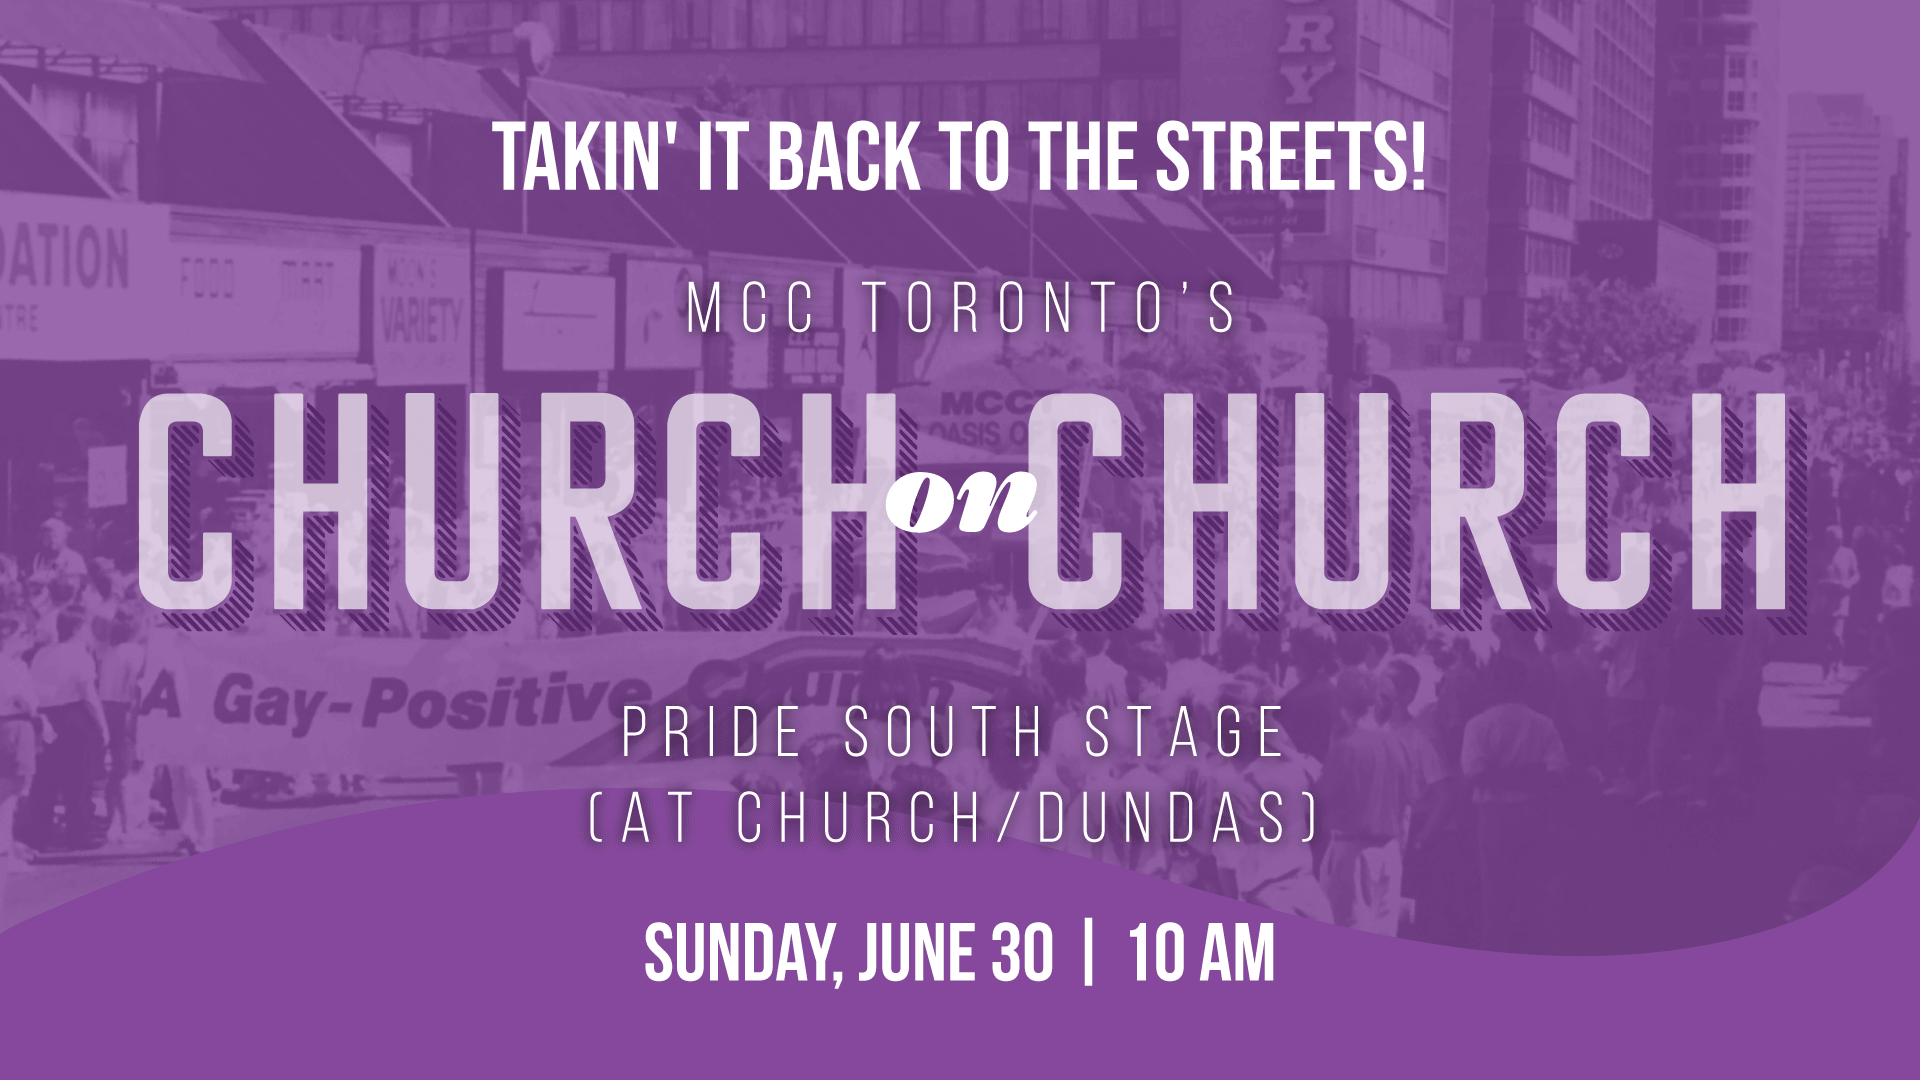 Promotional banner for MCC Toronto's 'Church on Church' event during a Pride festival. The banner features a purple overlay with white and gray text. It reads 'Takin' it back to the streets! MCC Toronto’s Church on Church, Pride South Stage (at Church/Dundas), Sunday, June 30, 10 AM.' In the background, a blurred photo of a crowded street scene during a previous event is visible.